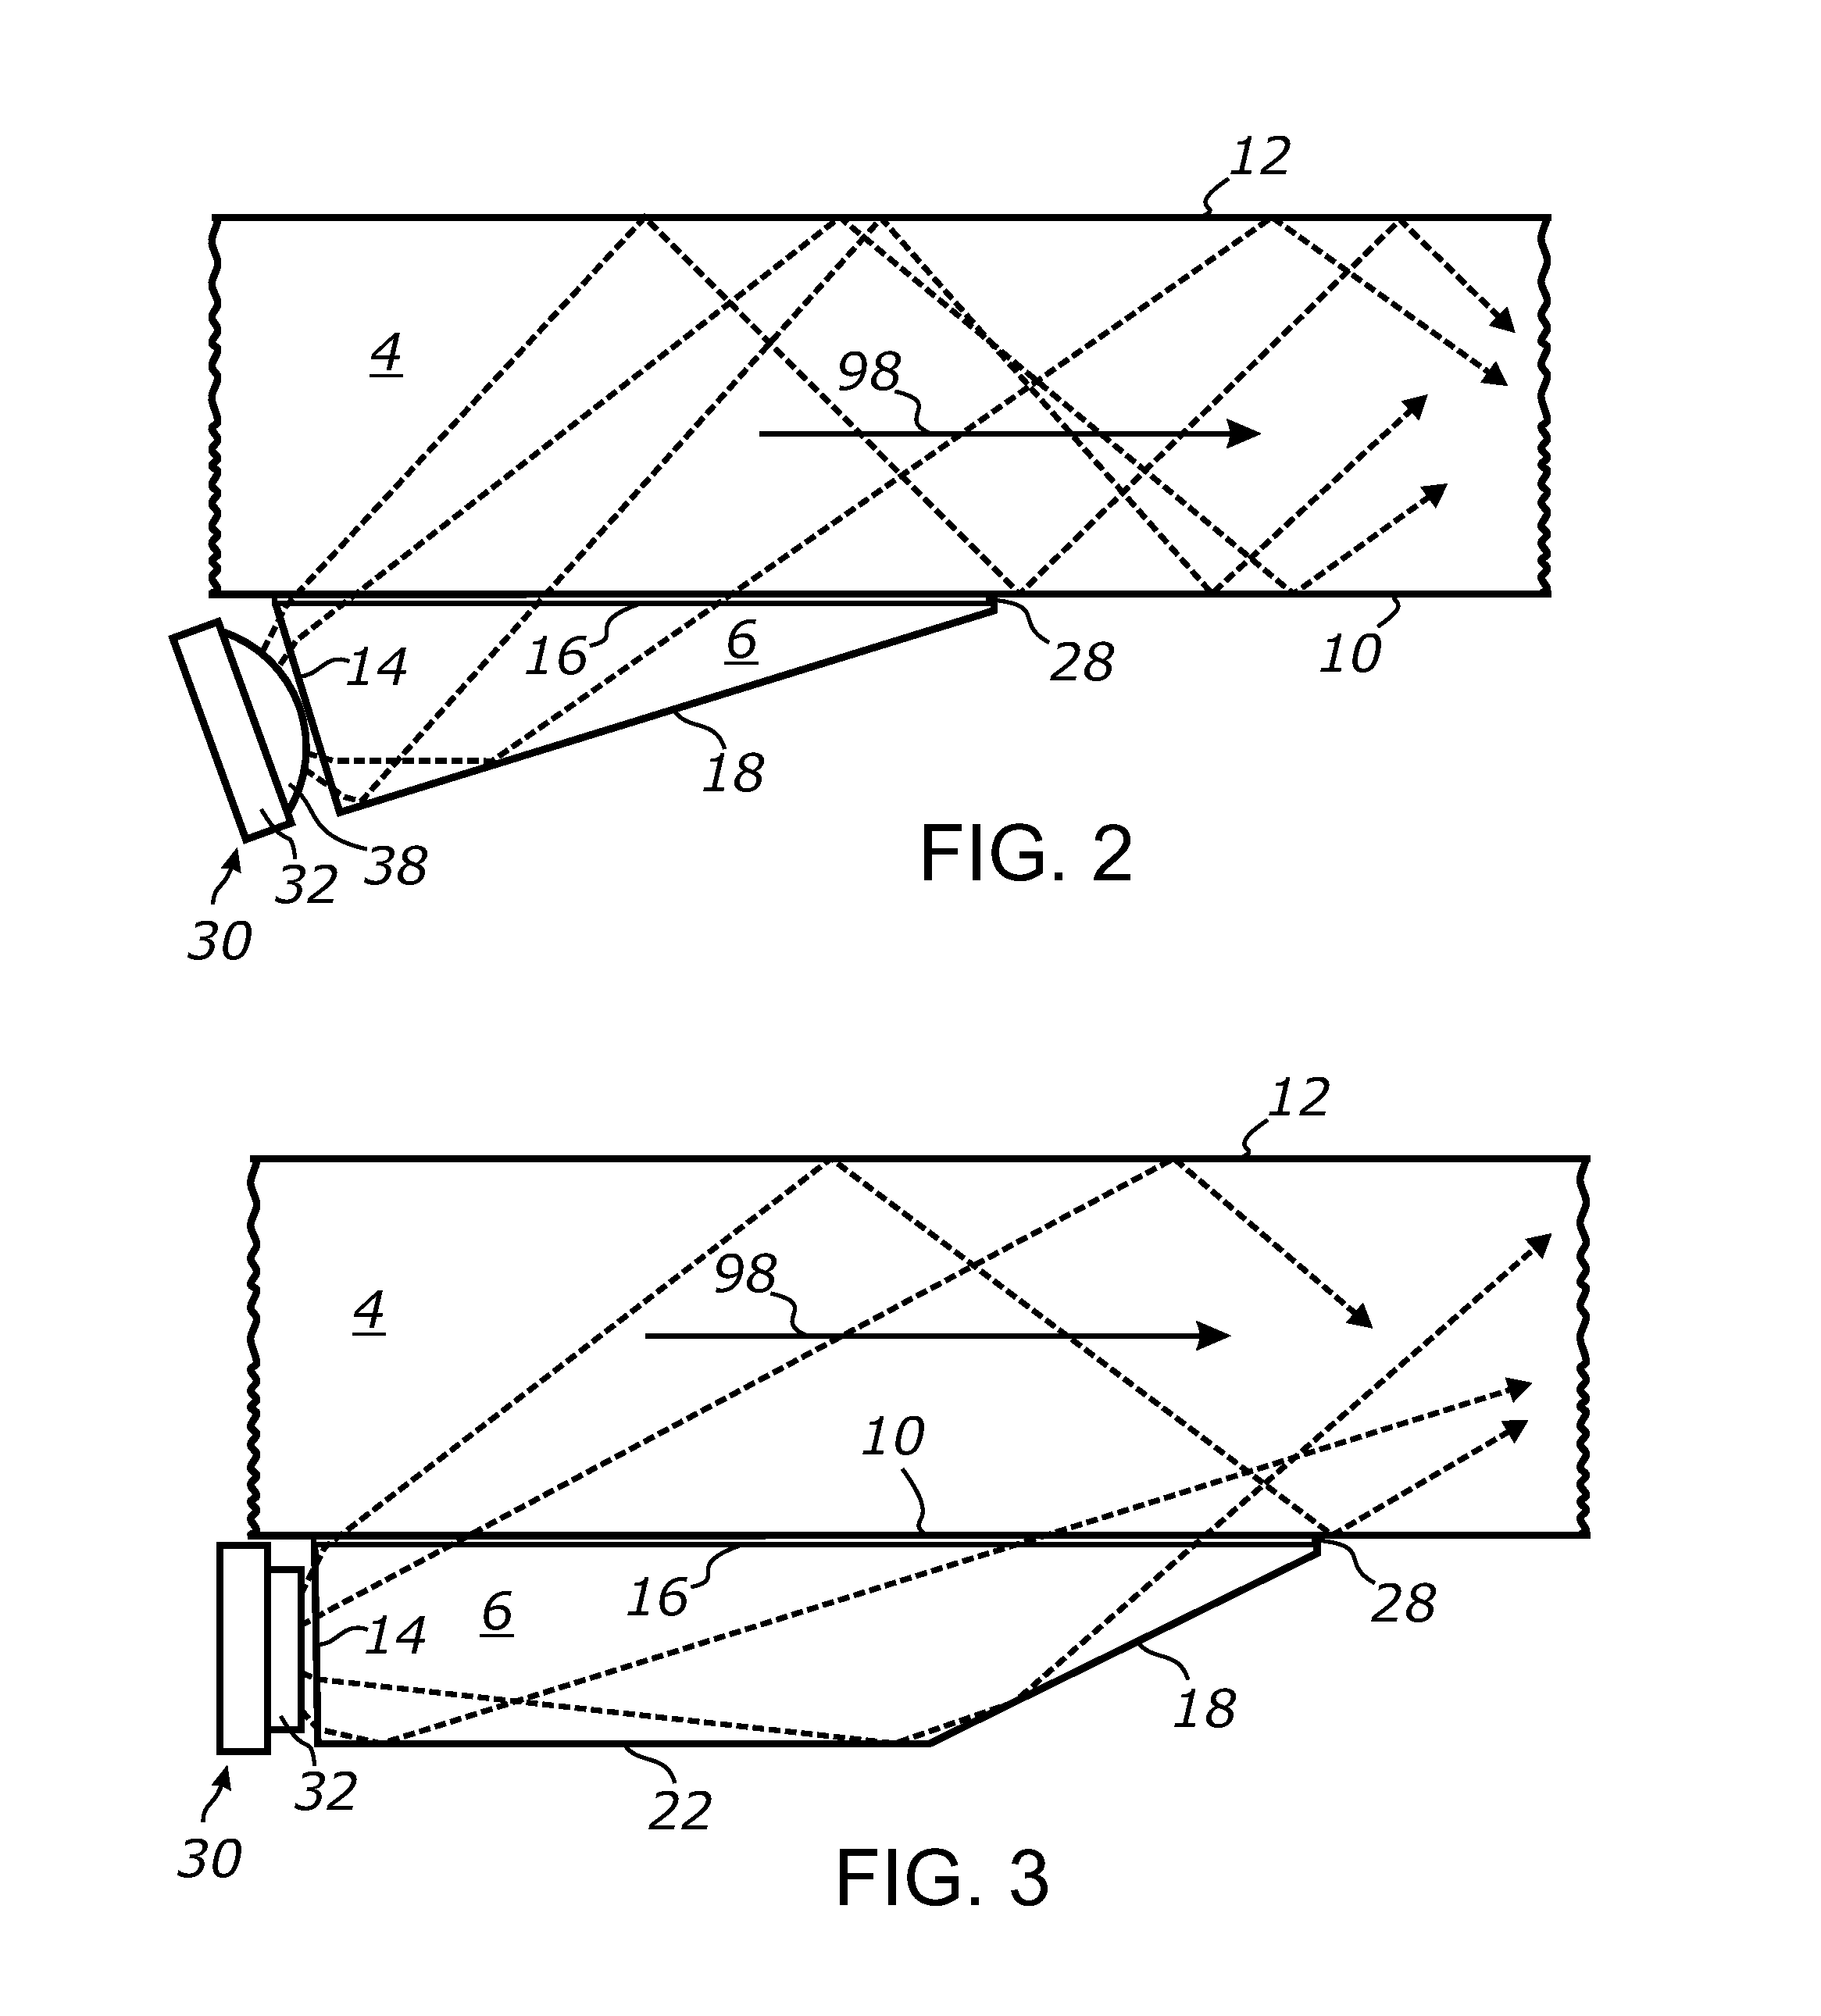 Face-lit waveguide illumination systems